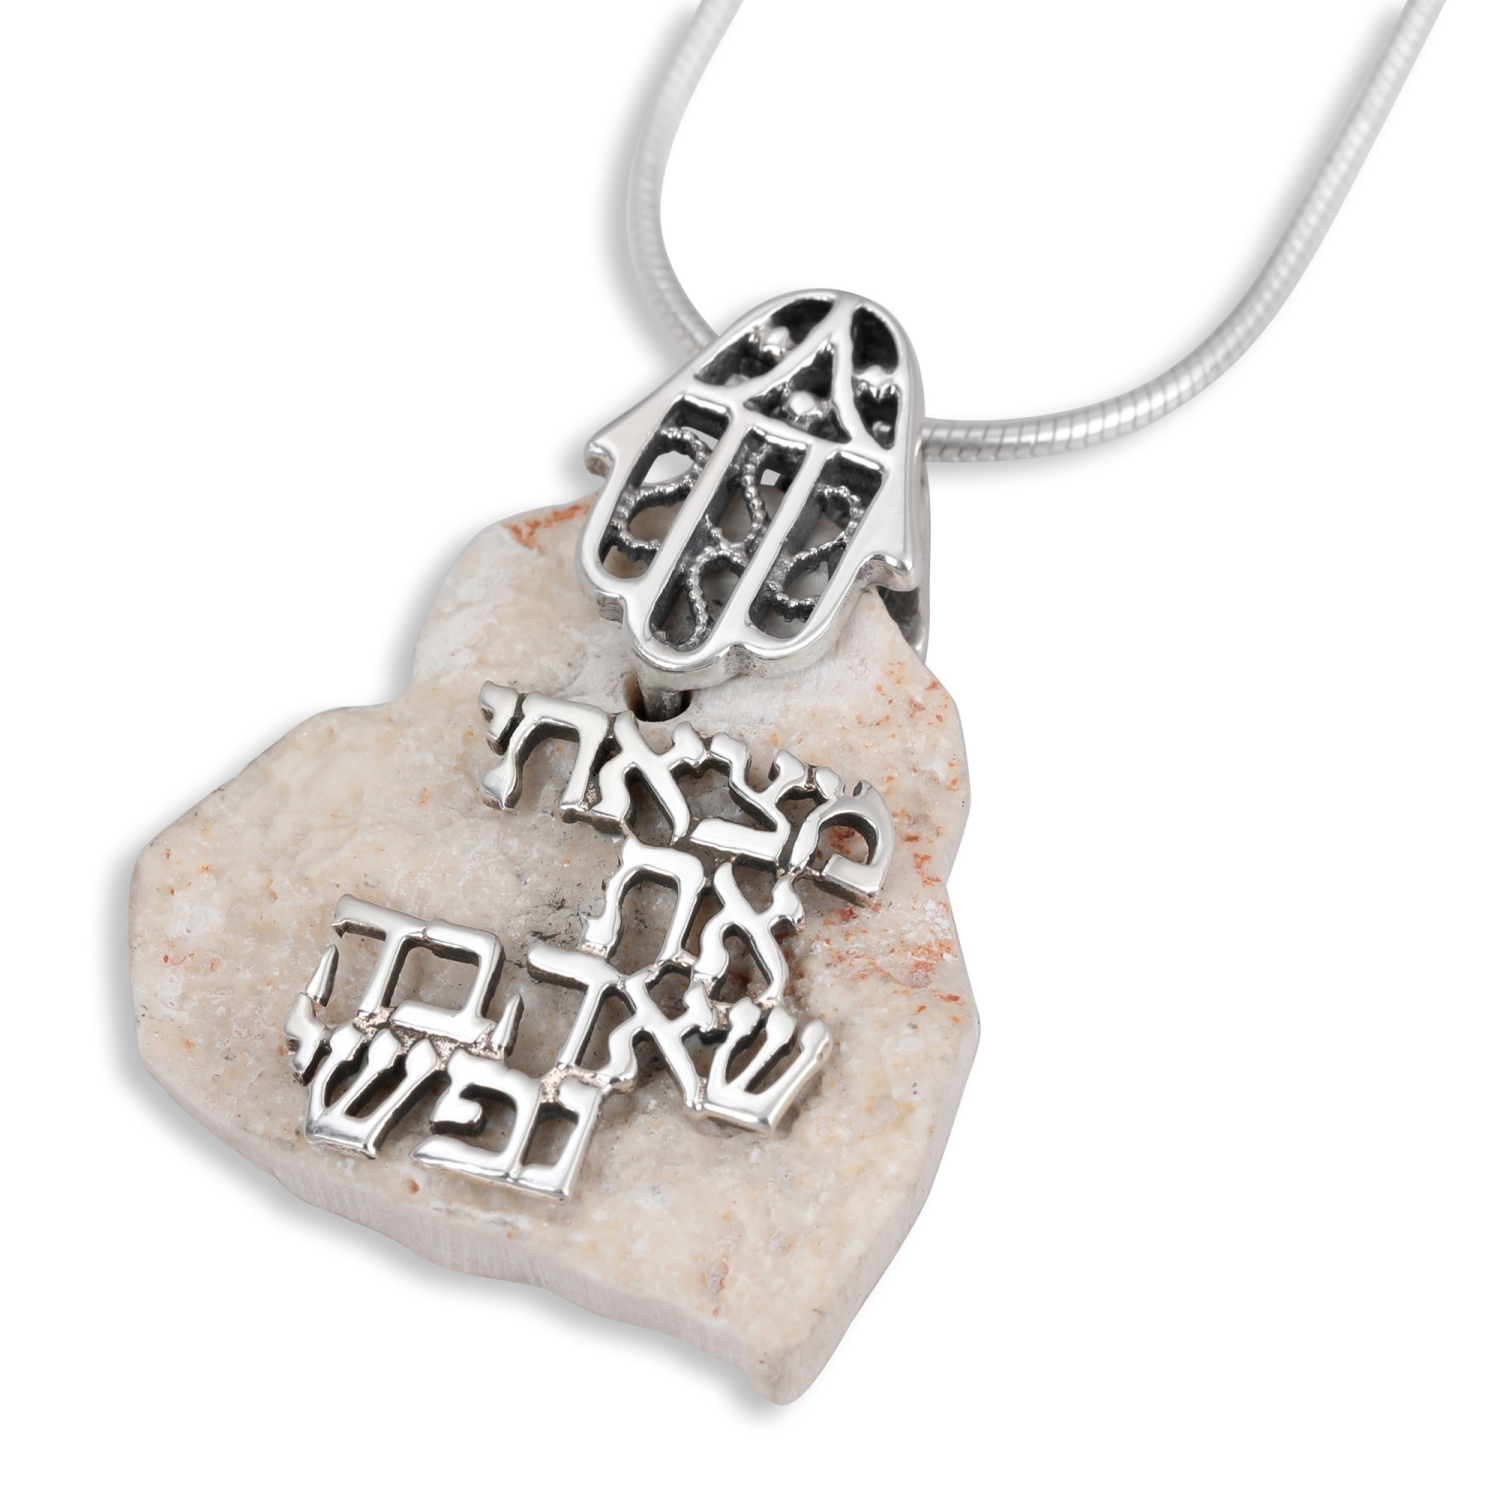 Jerusalem Stone Heart Necklace with Sterling Silver Hamsa and Love Verse - 1